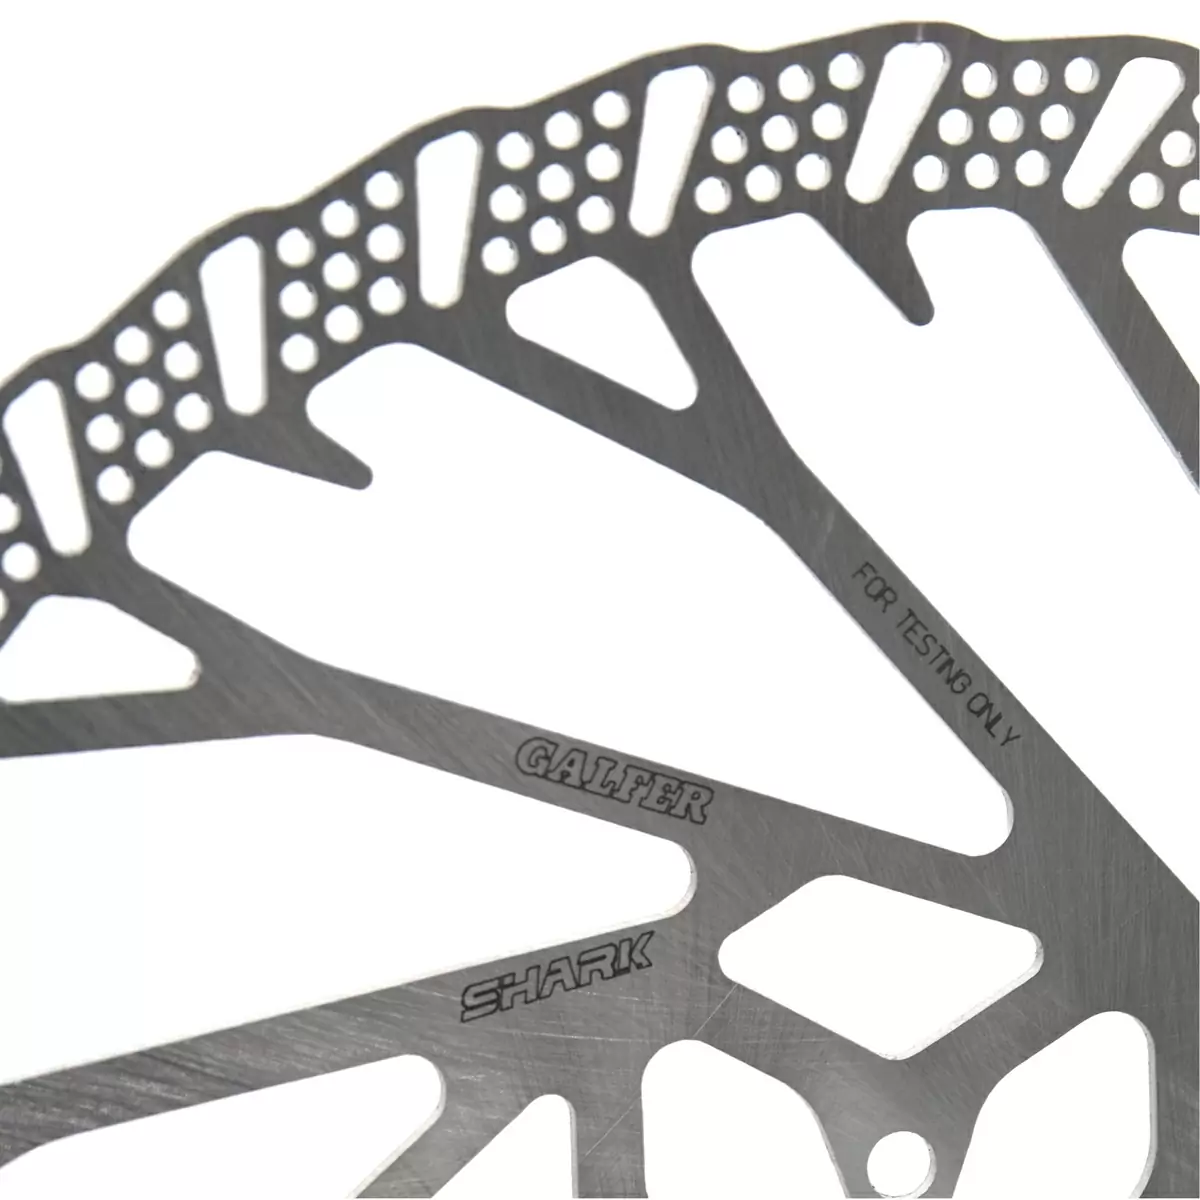 Shark Disc 203mm 6 holes 2mm thickness #1